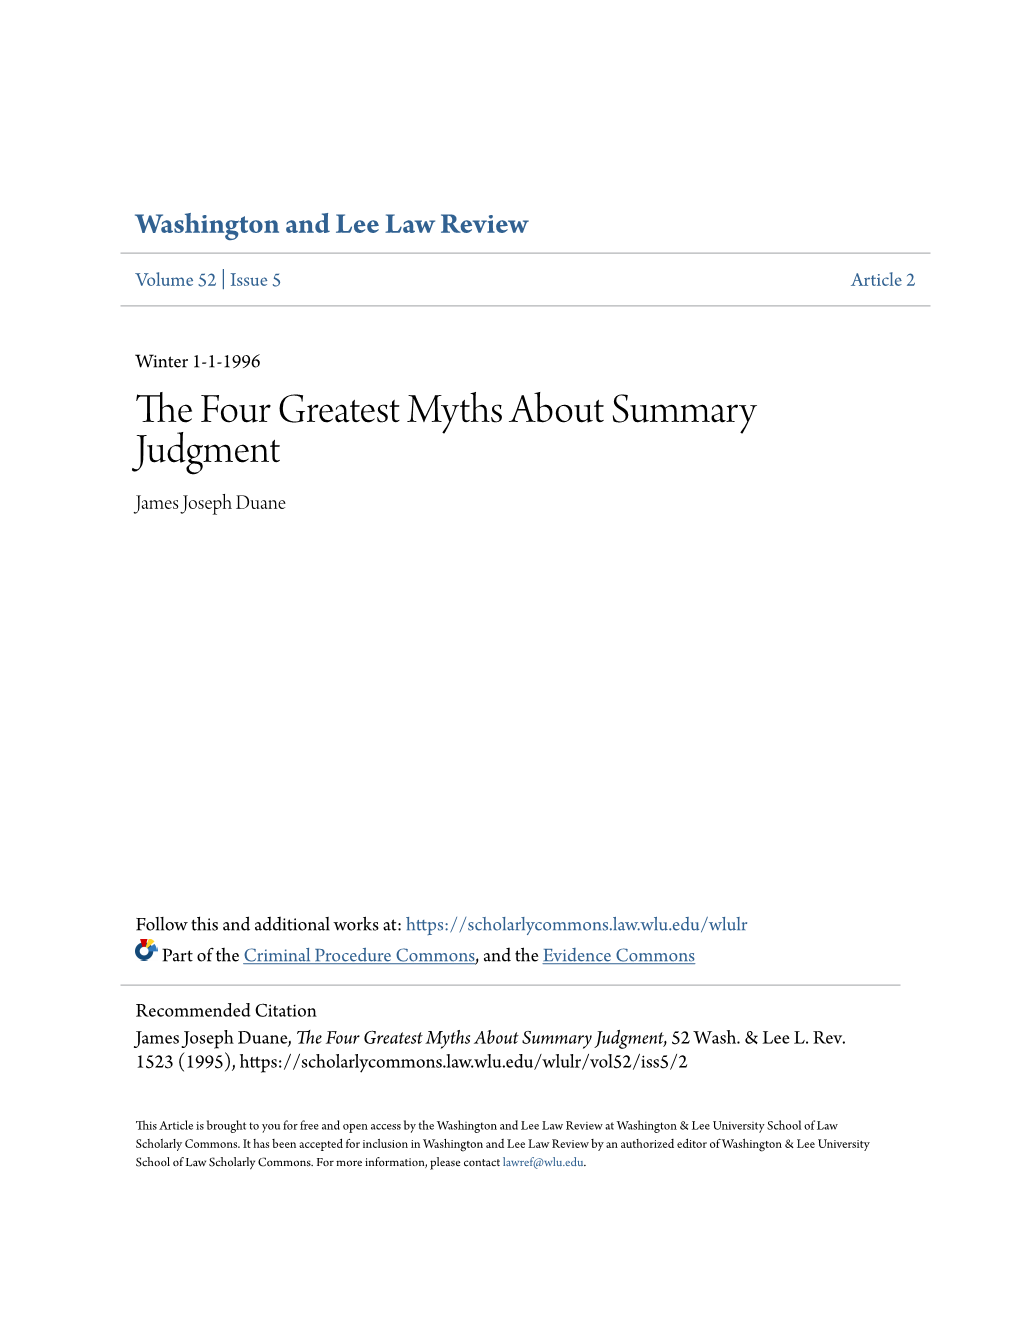 The Four Greatest Myths About Summary Judgment, 52 Wash